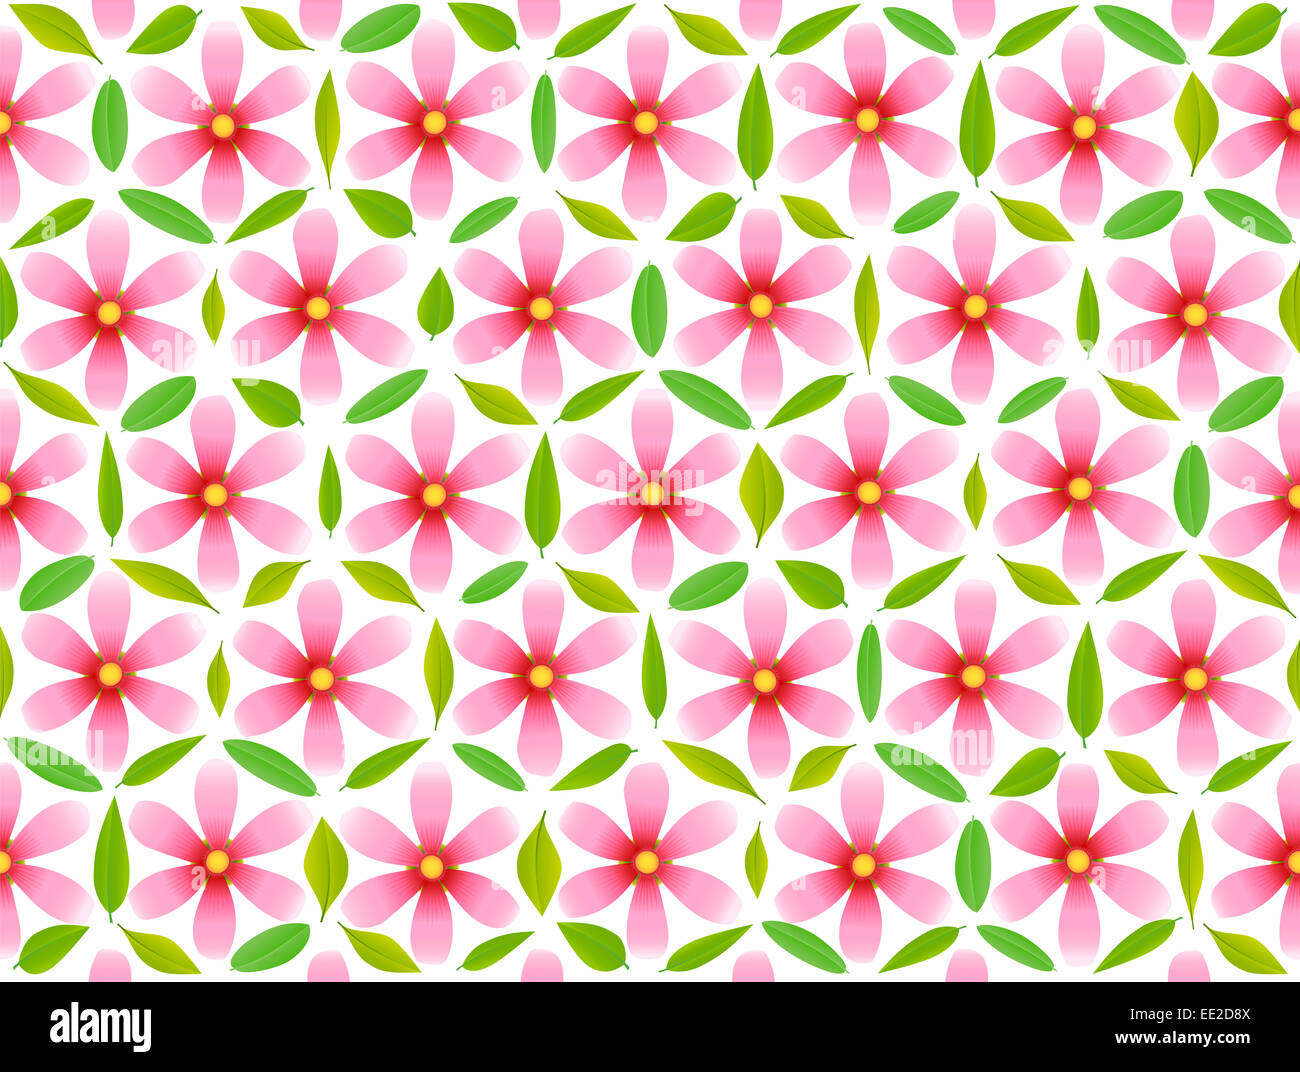 Flower of life pattern, composed of pink flowers and green leaves. Stock Photo